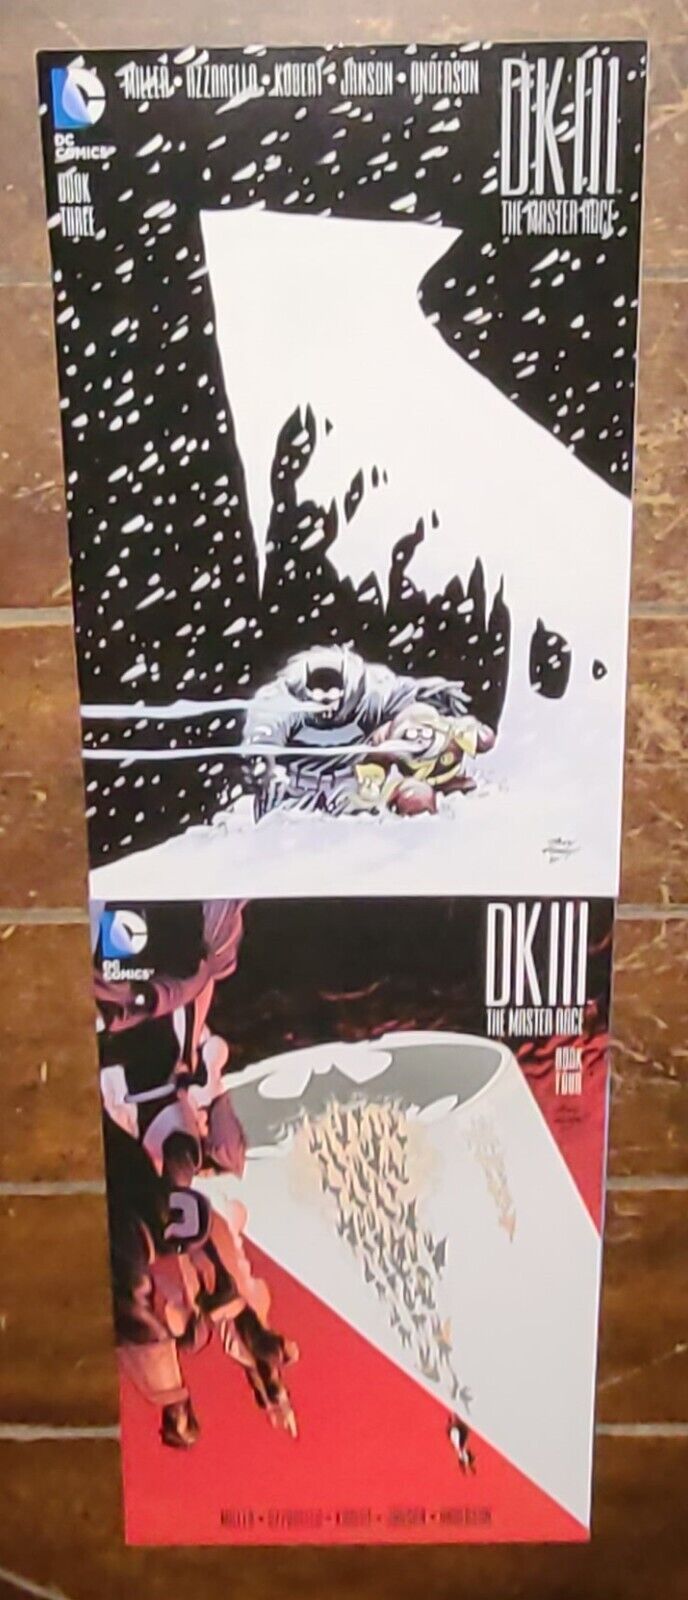 DK III the Master Race Books Three & Four by Frank Miller, (2016, DC Prestige)